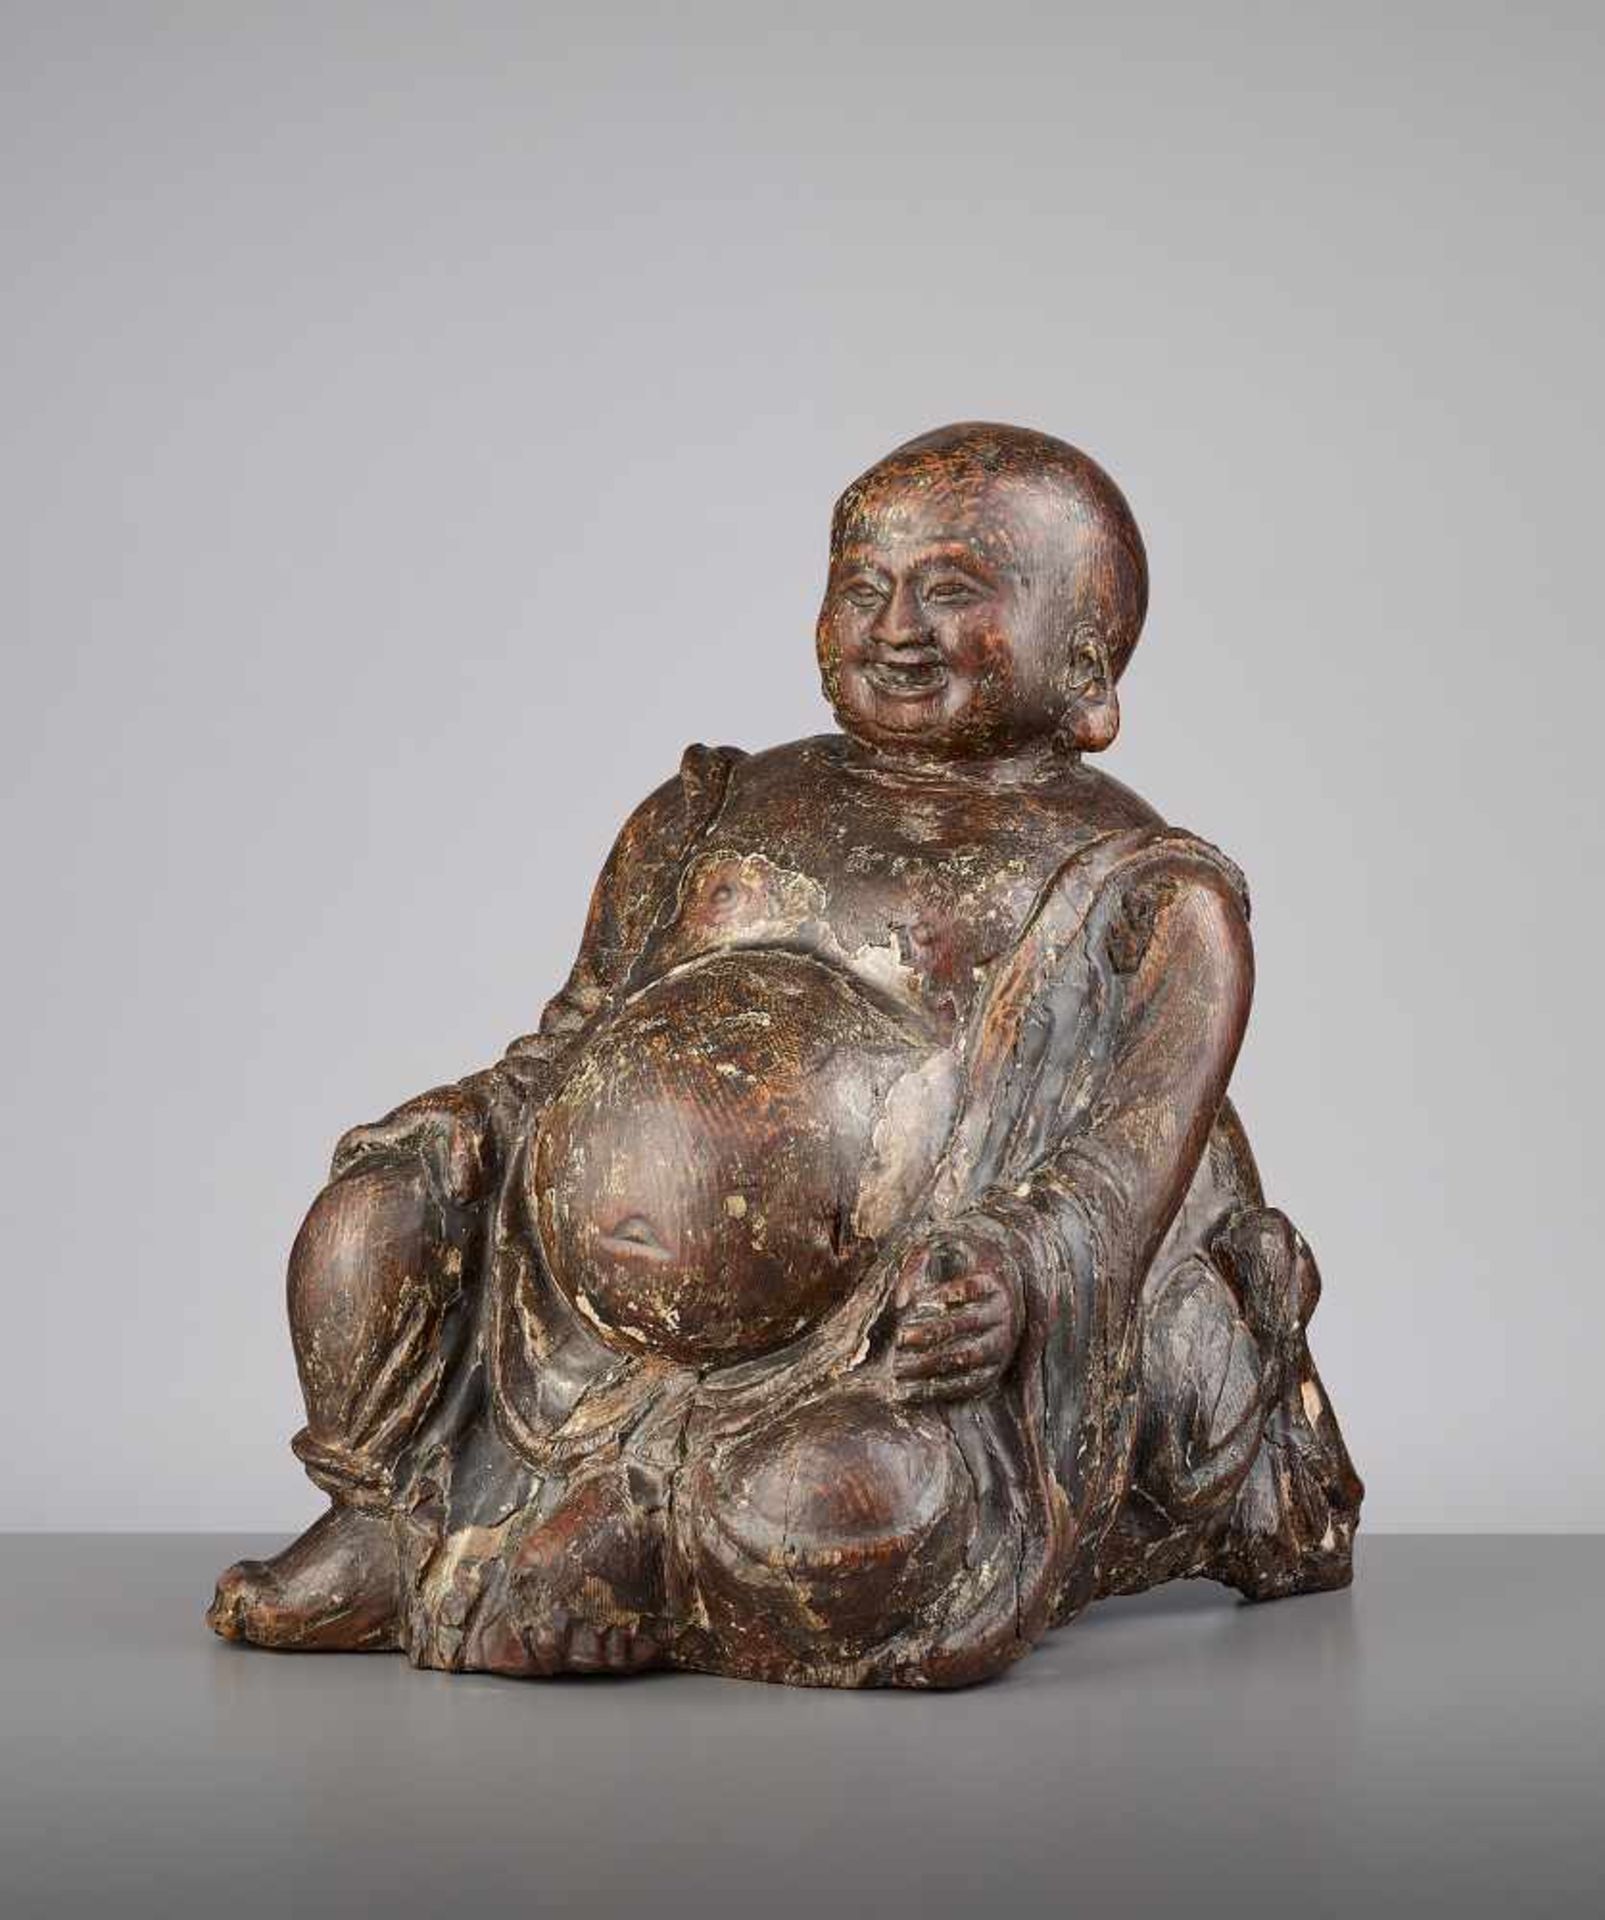 AN EXPRESSIVE WOOD BUDAI, MINGChina, 15th - 16th century. This earthy yet radiant sculpture of Budai - Image 3 of 9